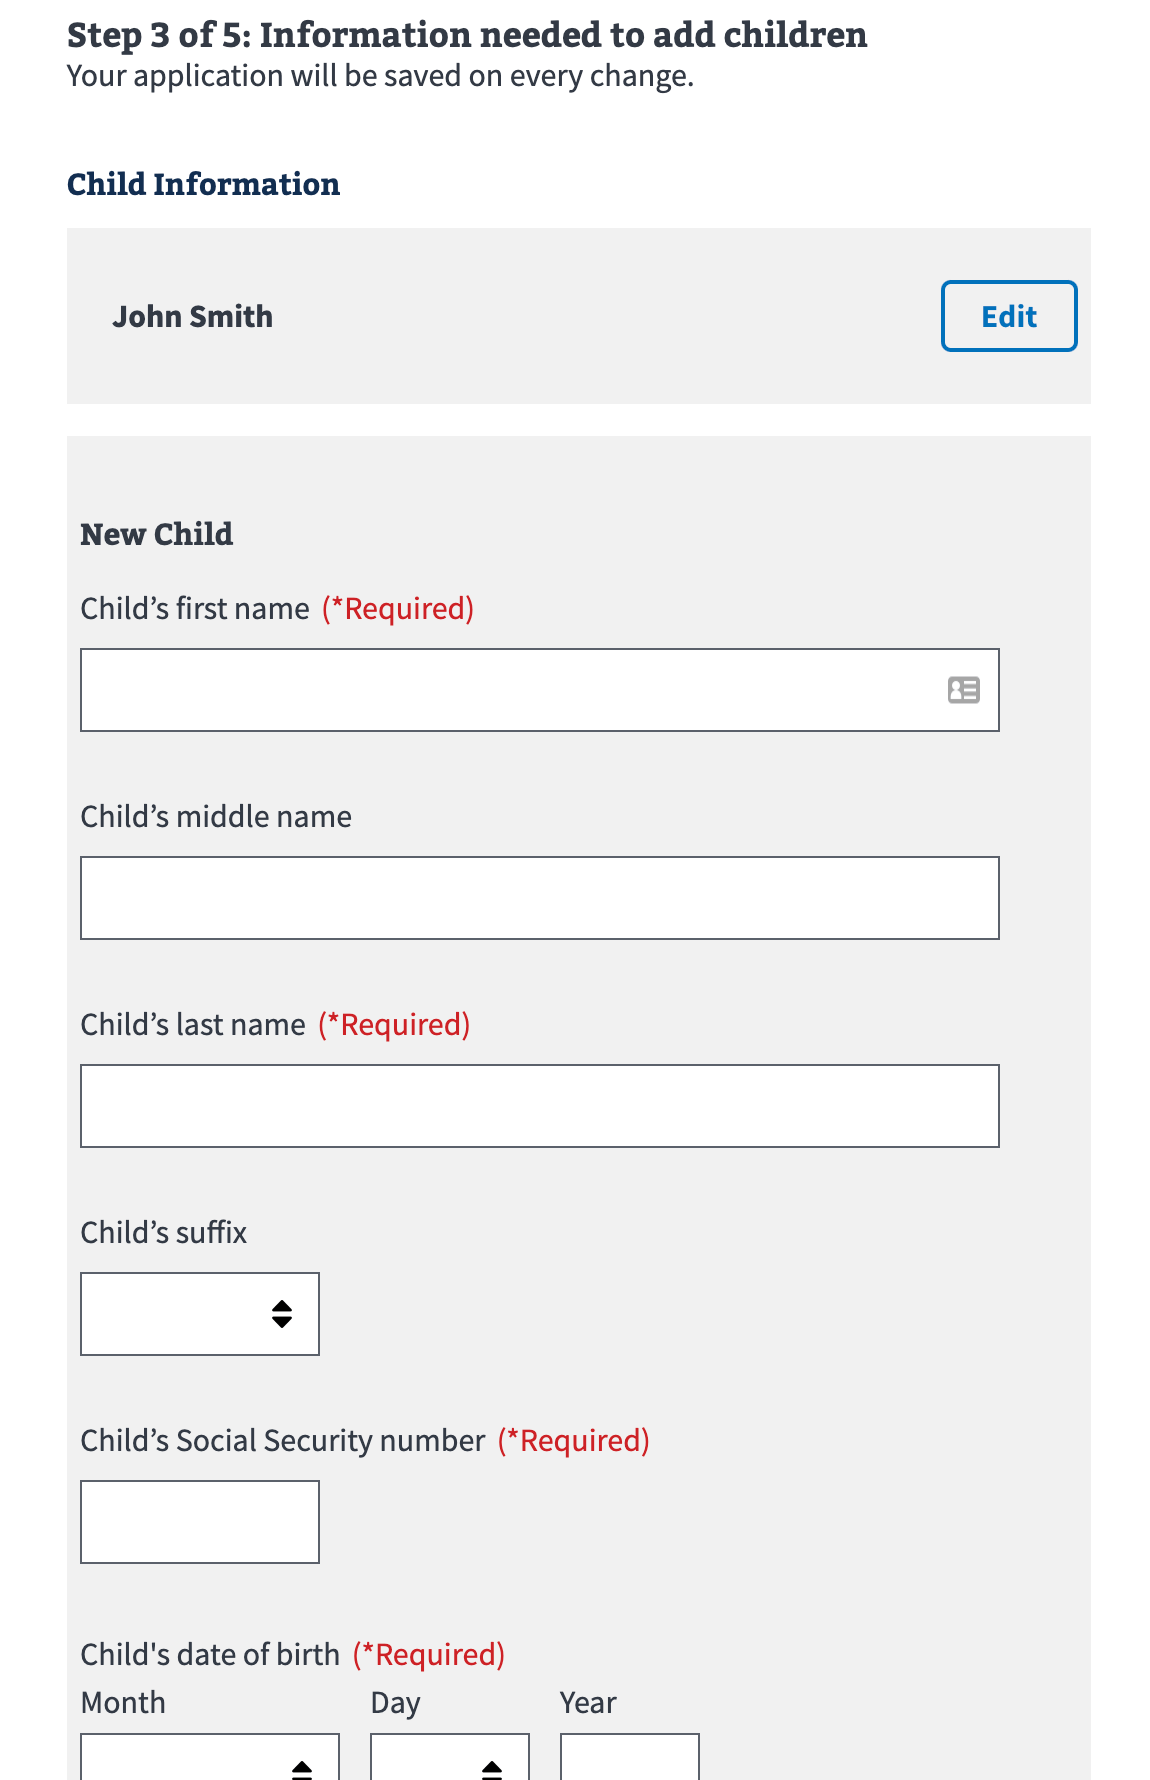 Additional forms fields asking for child first, middle, and last name, social security number, and date of birth.